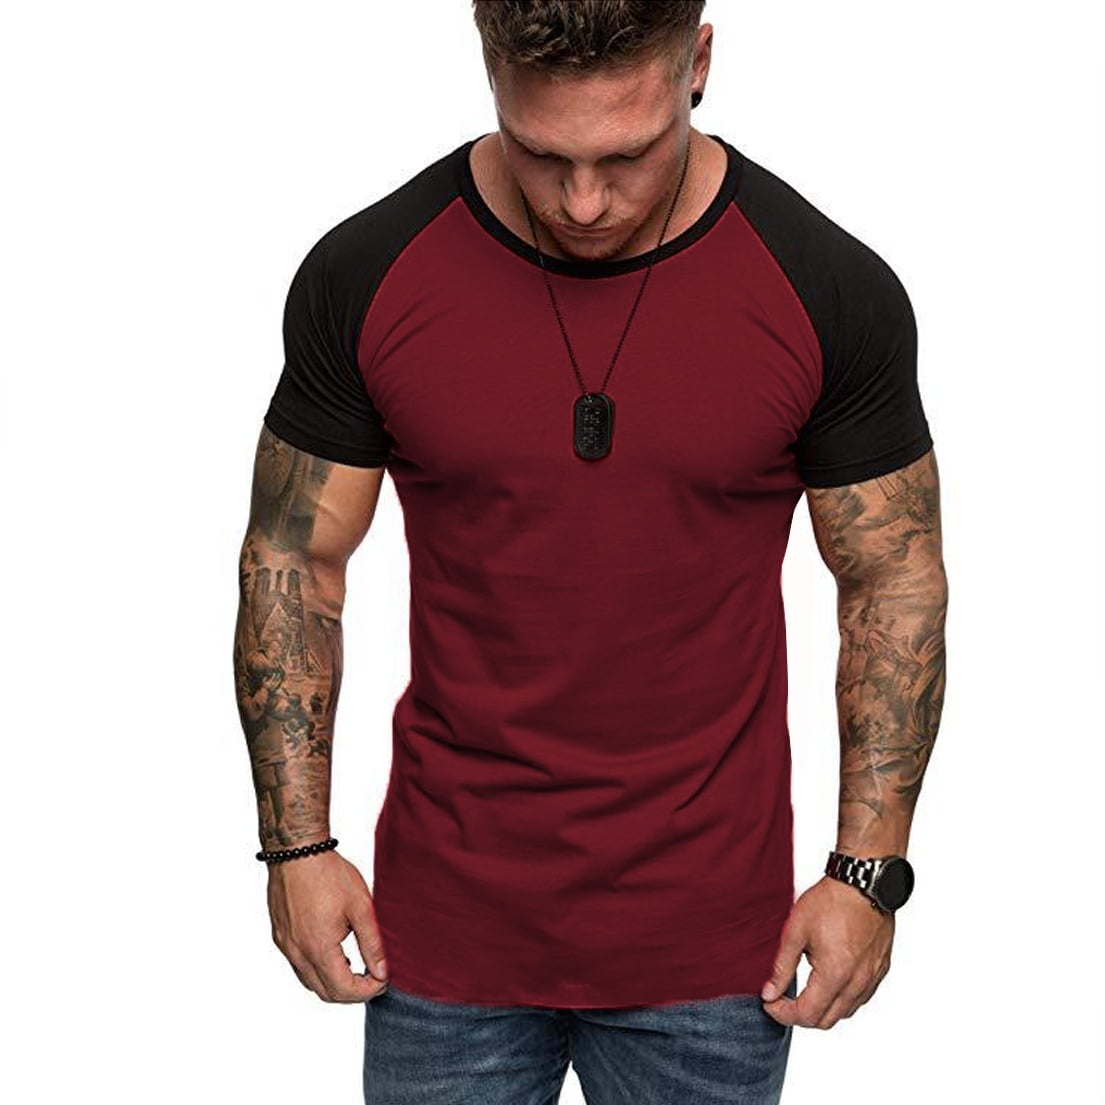 Mens Slim Fit O Neck Short Sleeve Muscle Tee Shirts Casual T-shirt Tops Blouse T 